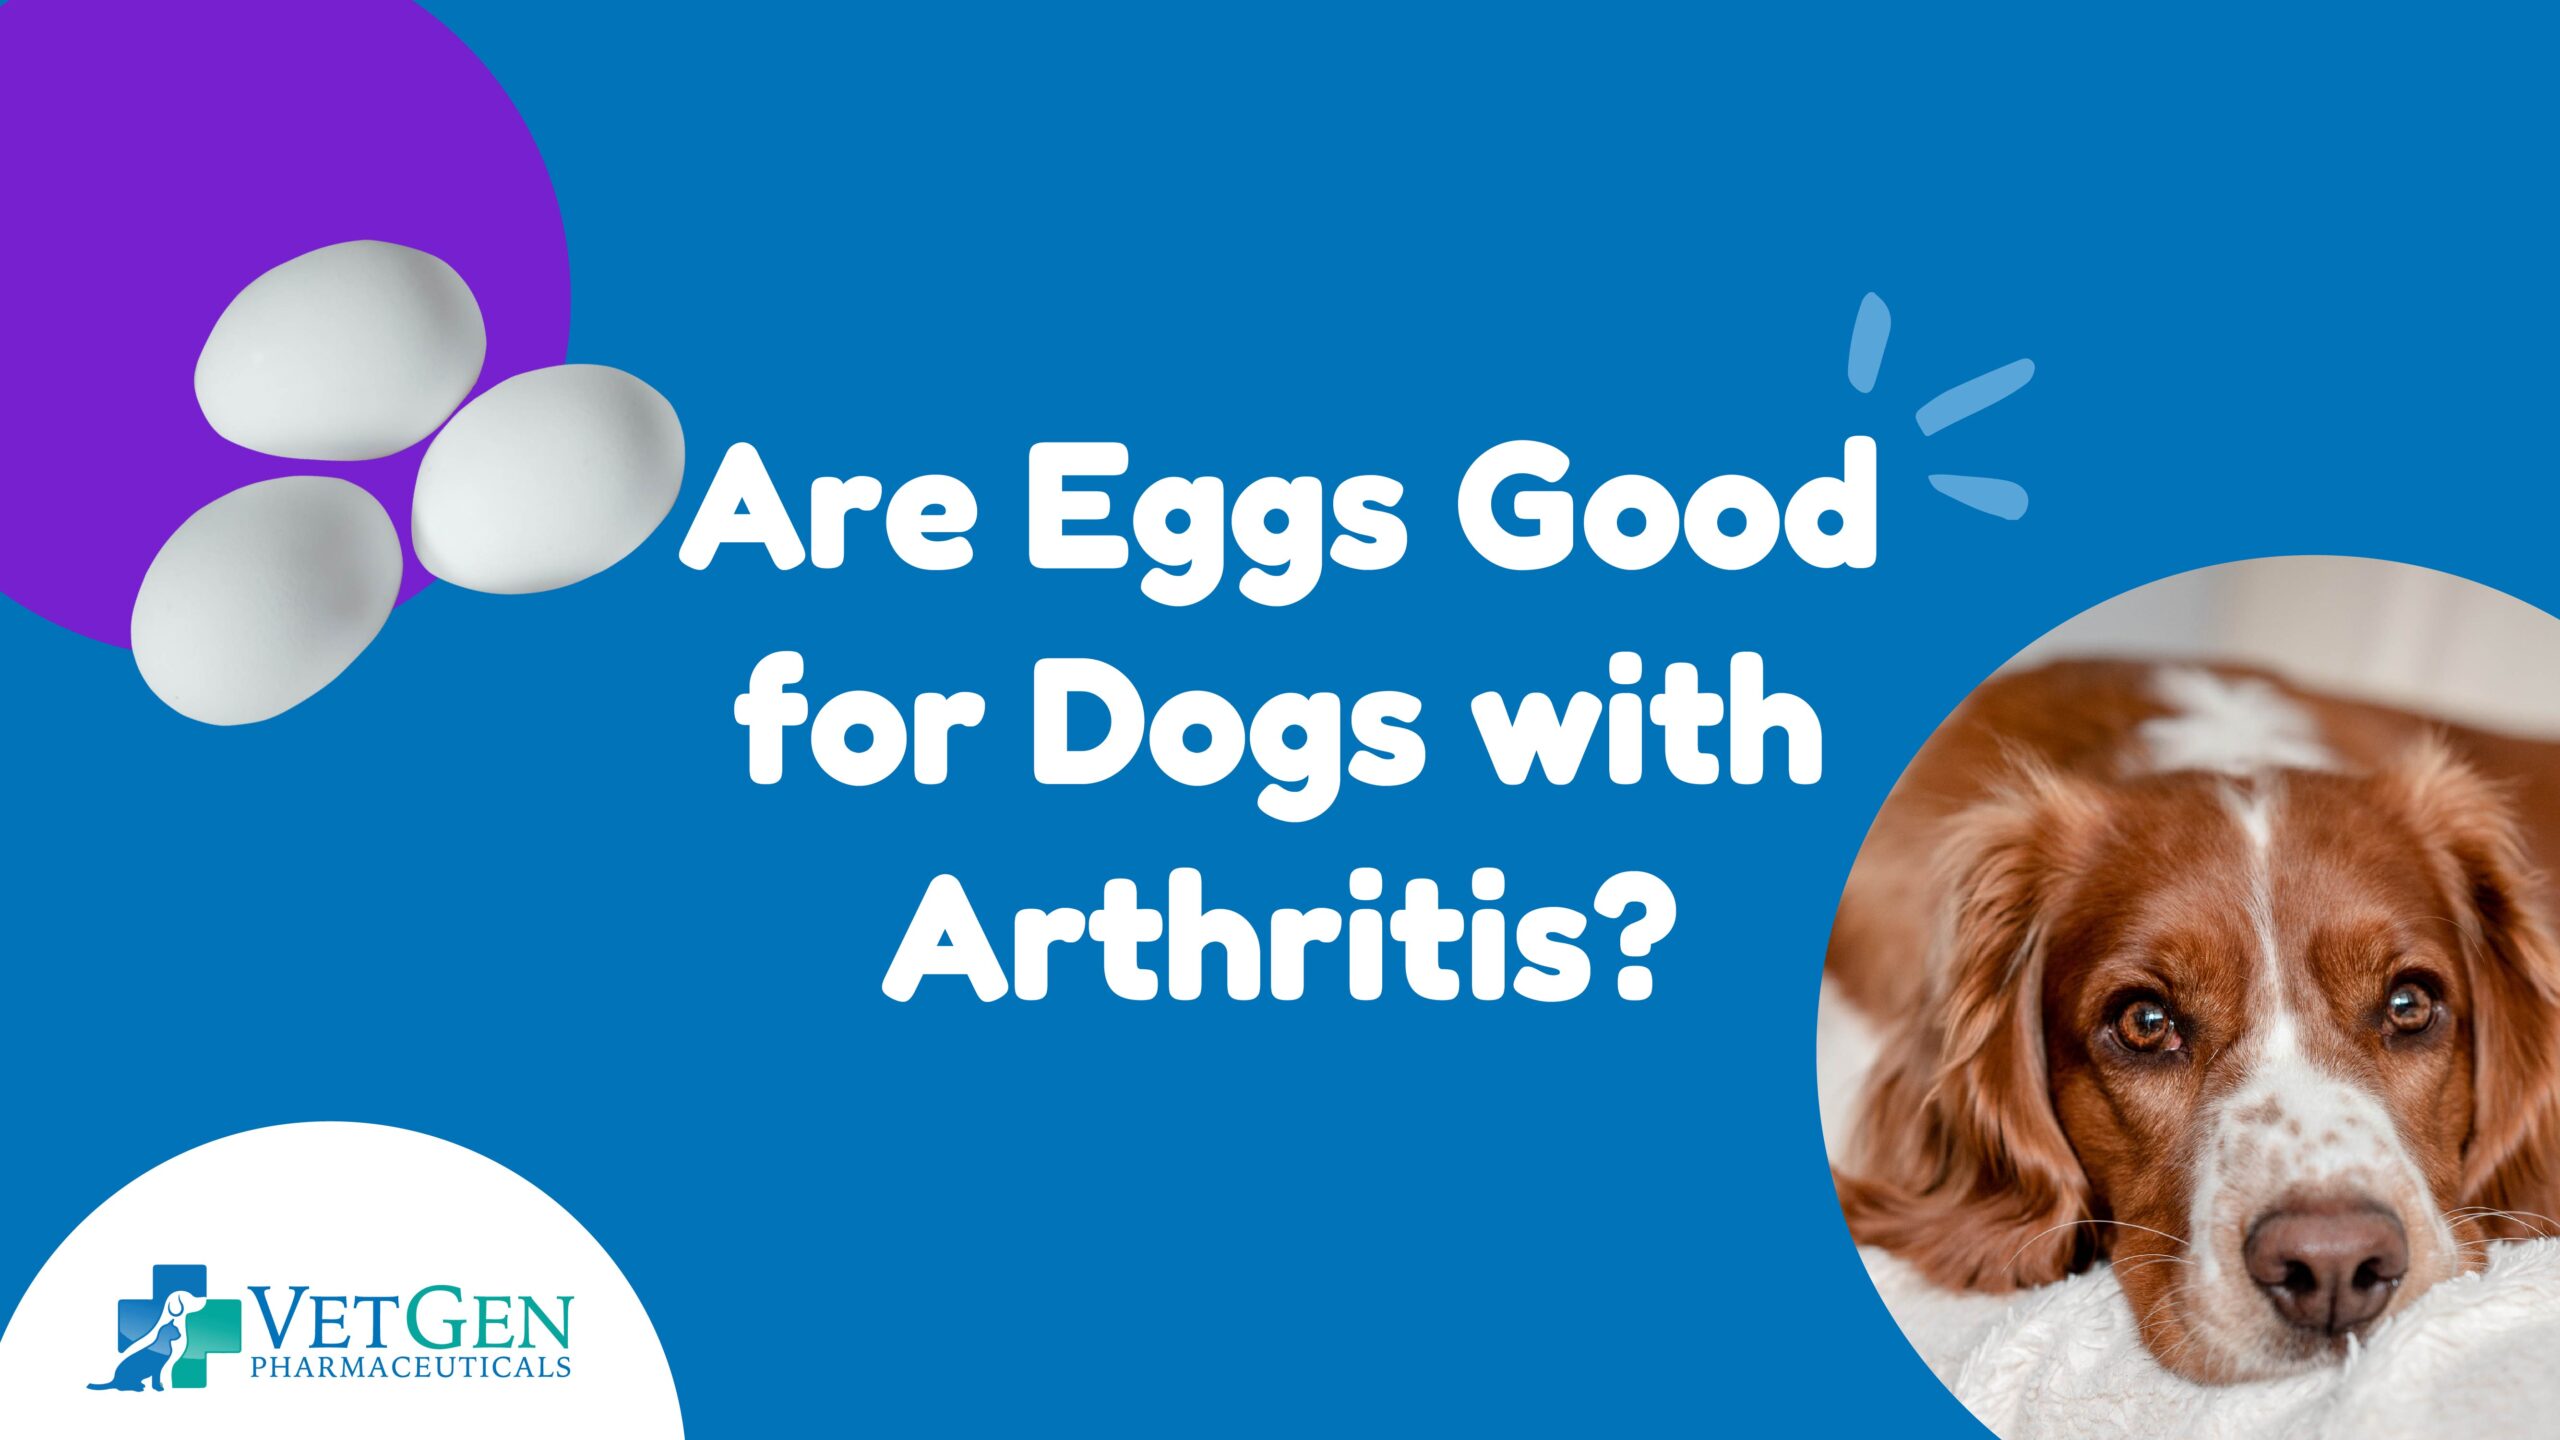 Are eggs good for dogs with arthritis?